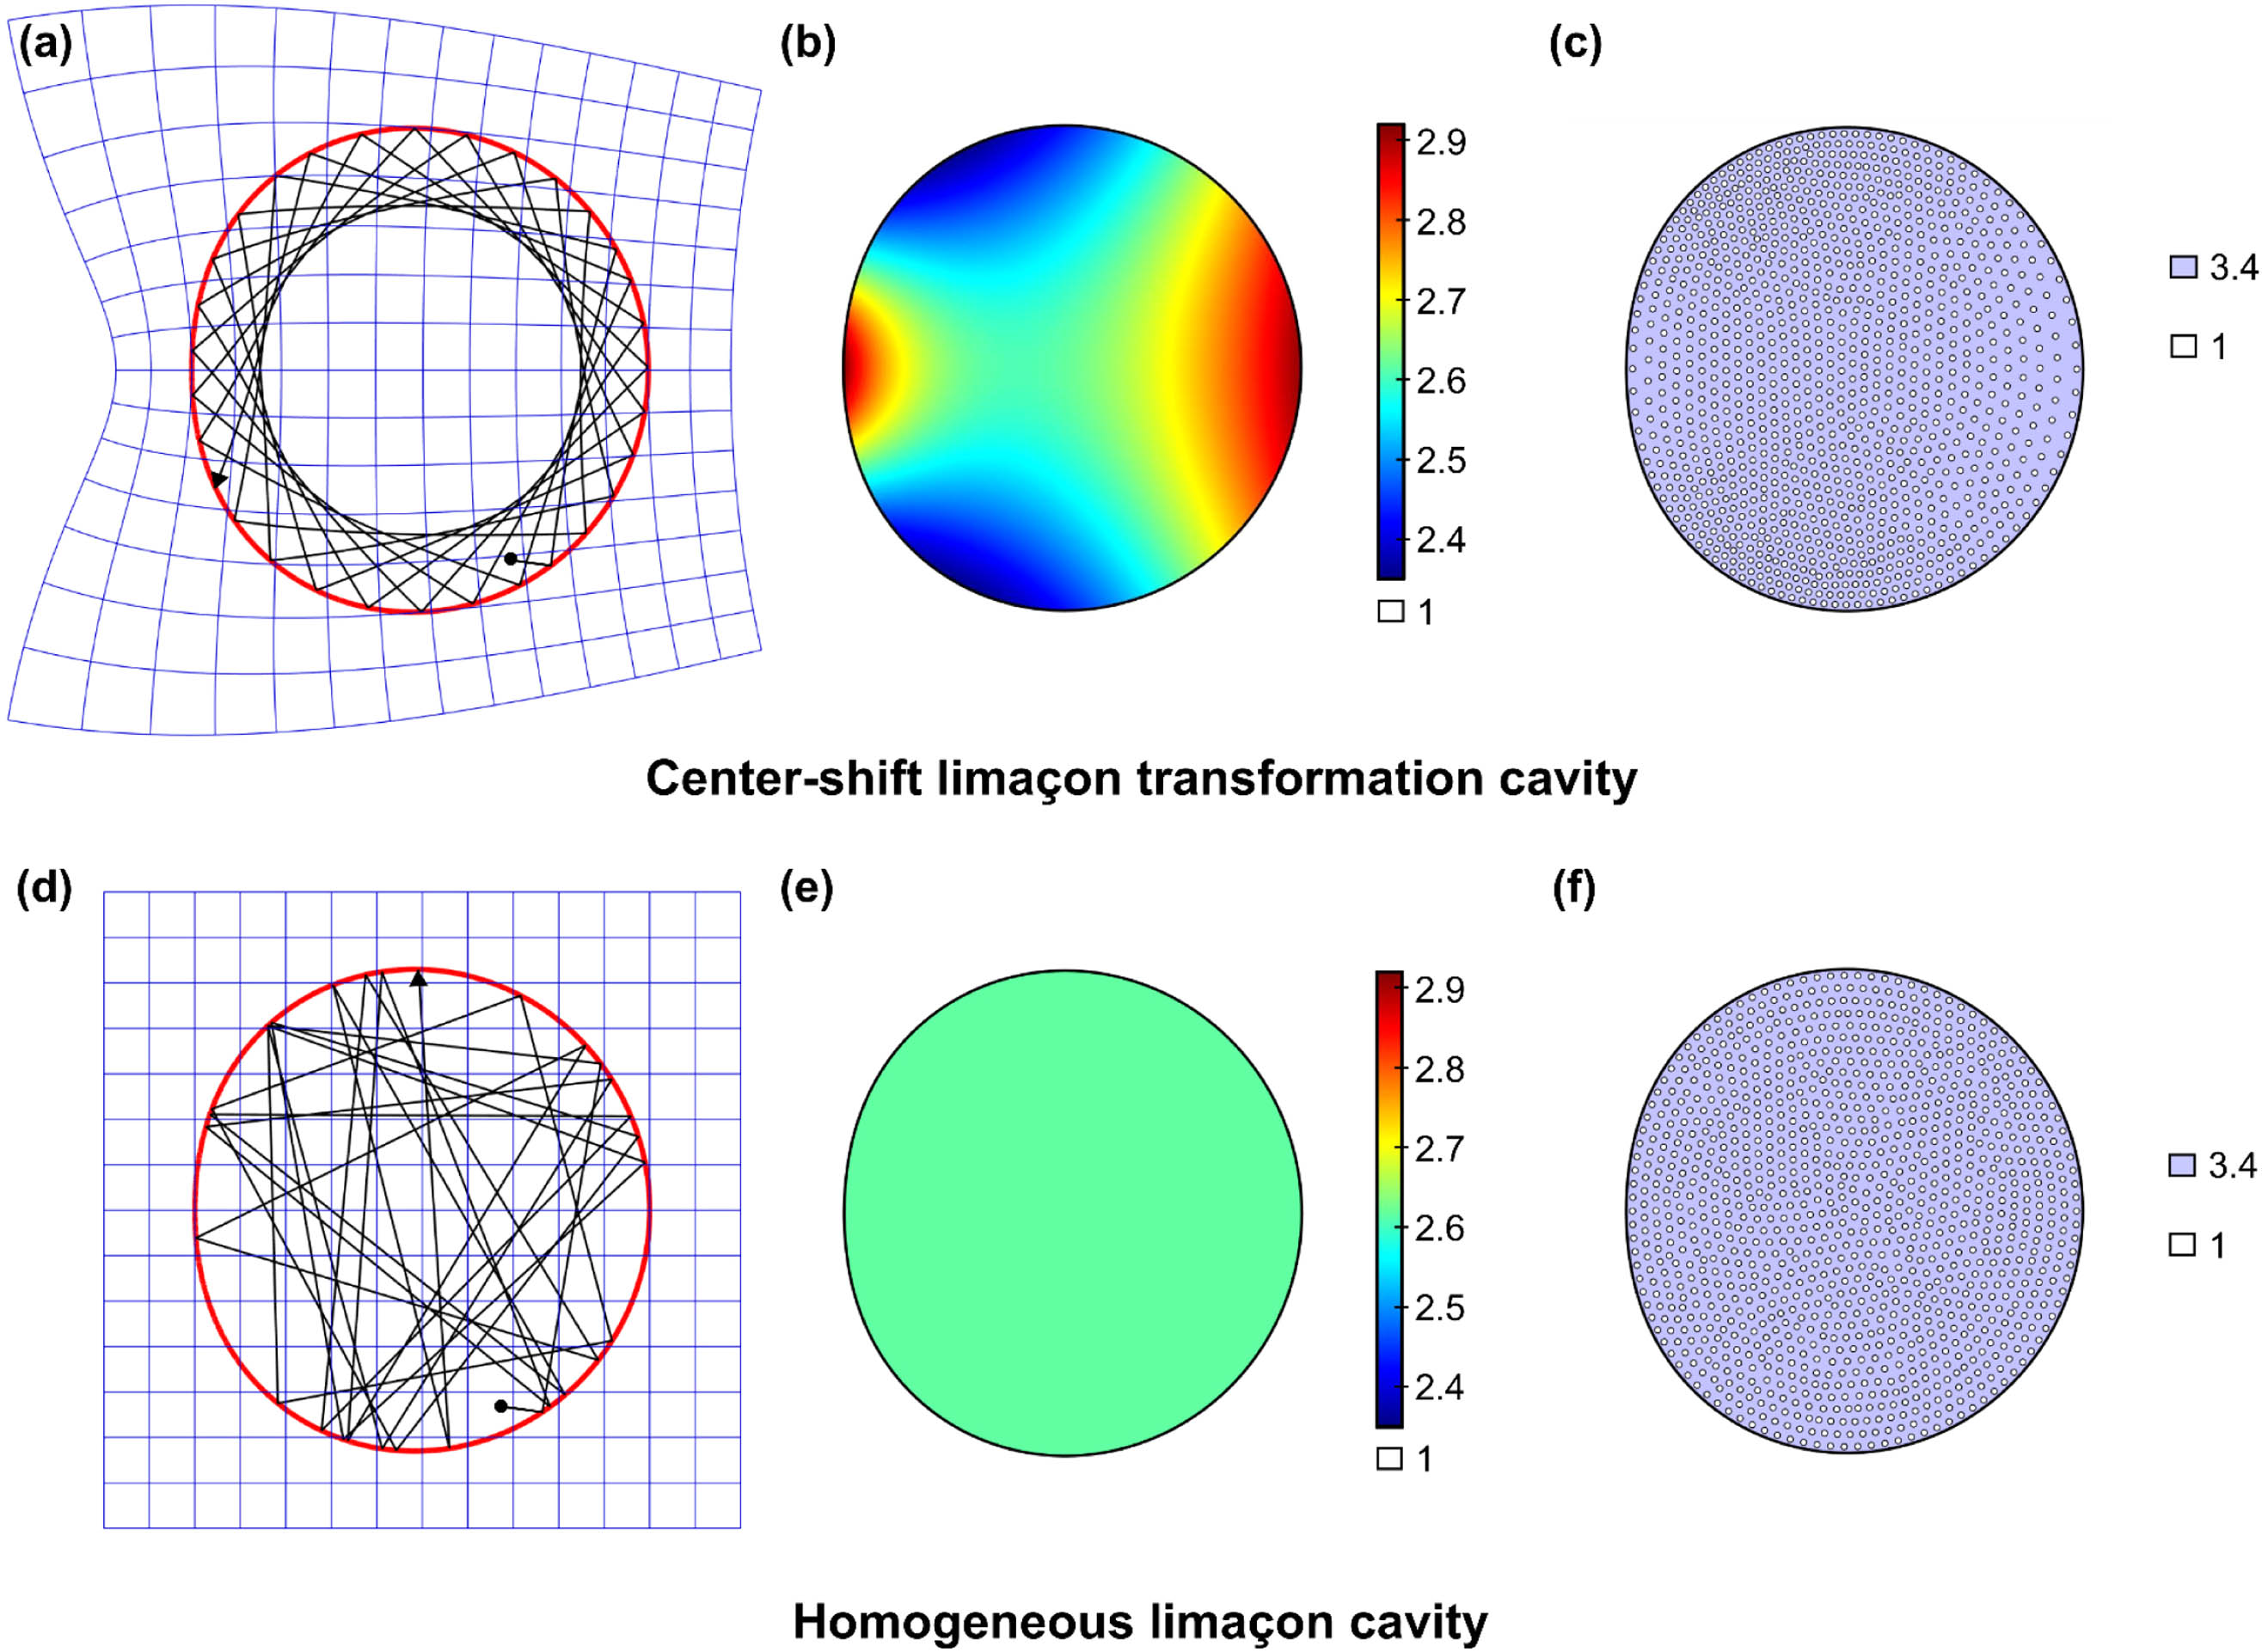 Ray trajectories, 2D refractive index profiles, and 3D nanohole distributions of a CS limaçon TC and the corresponding homogeneous limaçon cavity. (a) Well-ordered ray trajectory in the CS limaçon TC exhibiting similar caustic to a uniform disk. Curved blue lines are transformed images of the Cartesian grid lines in the original virtual space, and the red line is the boundary of a CS limaçon TC. (b) Two-dimensional CS limaçon TC and its refractive index profile. (c) Top view of 3D CS limaçon TC implemented by nanohole distribution. (d) Chaotic ray trajectory in the homogeneous limaçon cavity. The ray is launched with the same incident angle as in (a). Straight blue lines are grid of the Cartesian coordinates. (e) Homogeneous limaçon-shaped cavity having the same shape as the CS limaçon TC and its refractive index. (f) Top view of 3D homogeneous limaçon cavity implemented by the nanohole distribution.